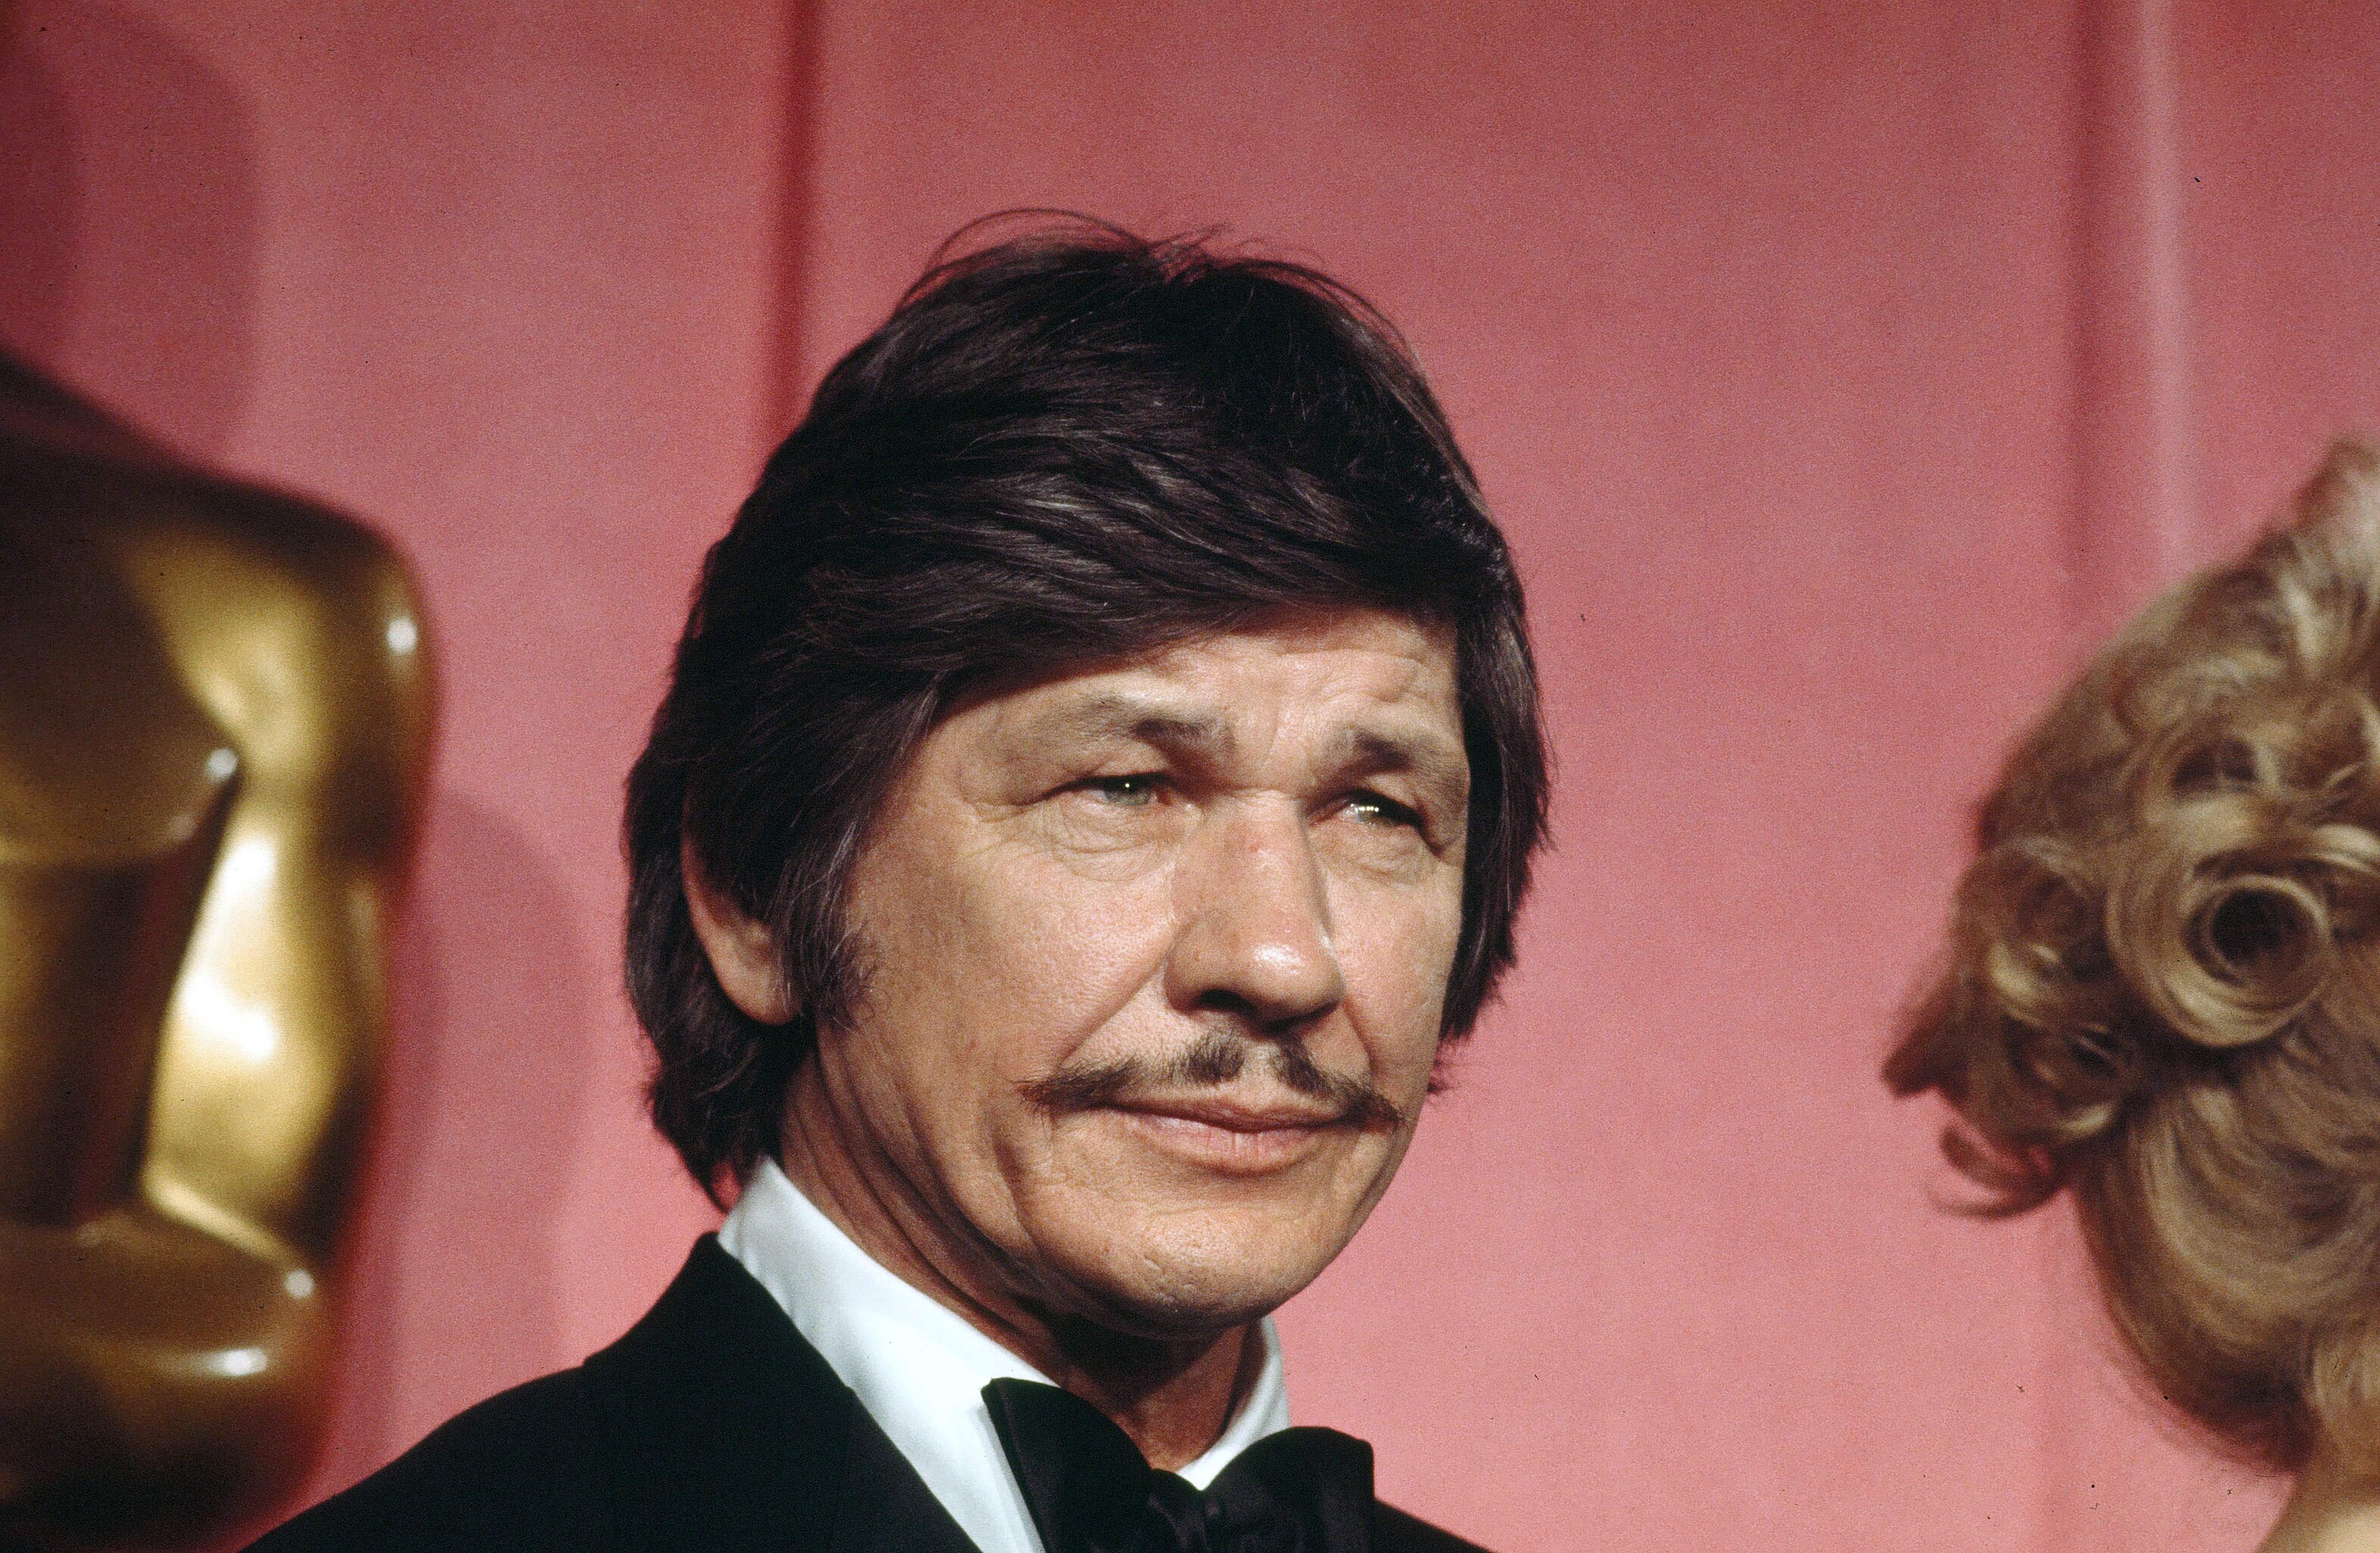 Actor Charles Bronson poses backstage after presenting "Best Supporting Actress" award during the 46th Academy Awards at Dorothy Chandler Pavilion in Los Angeles, California. | Source: Getty Images